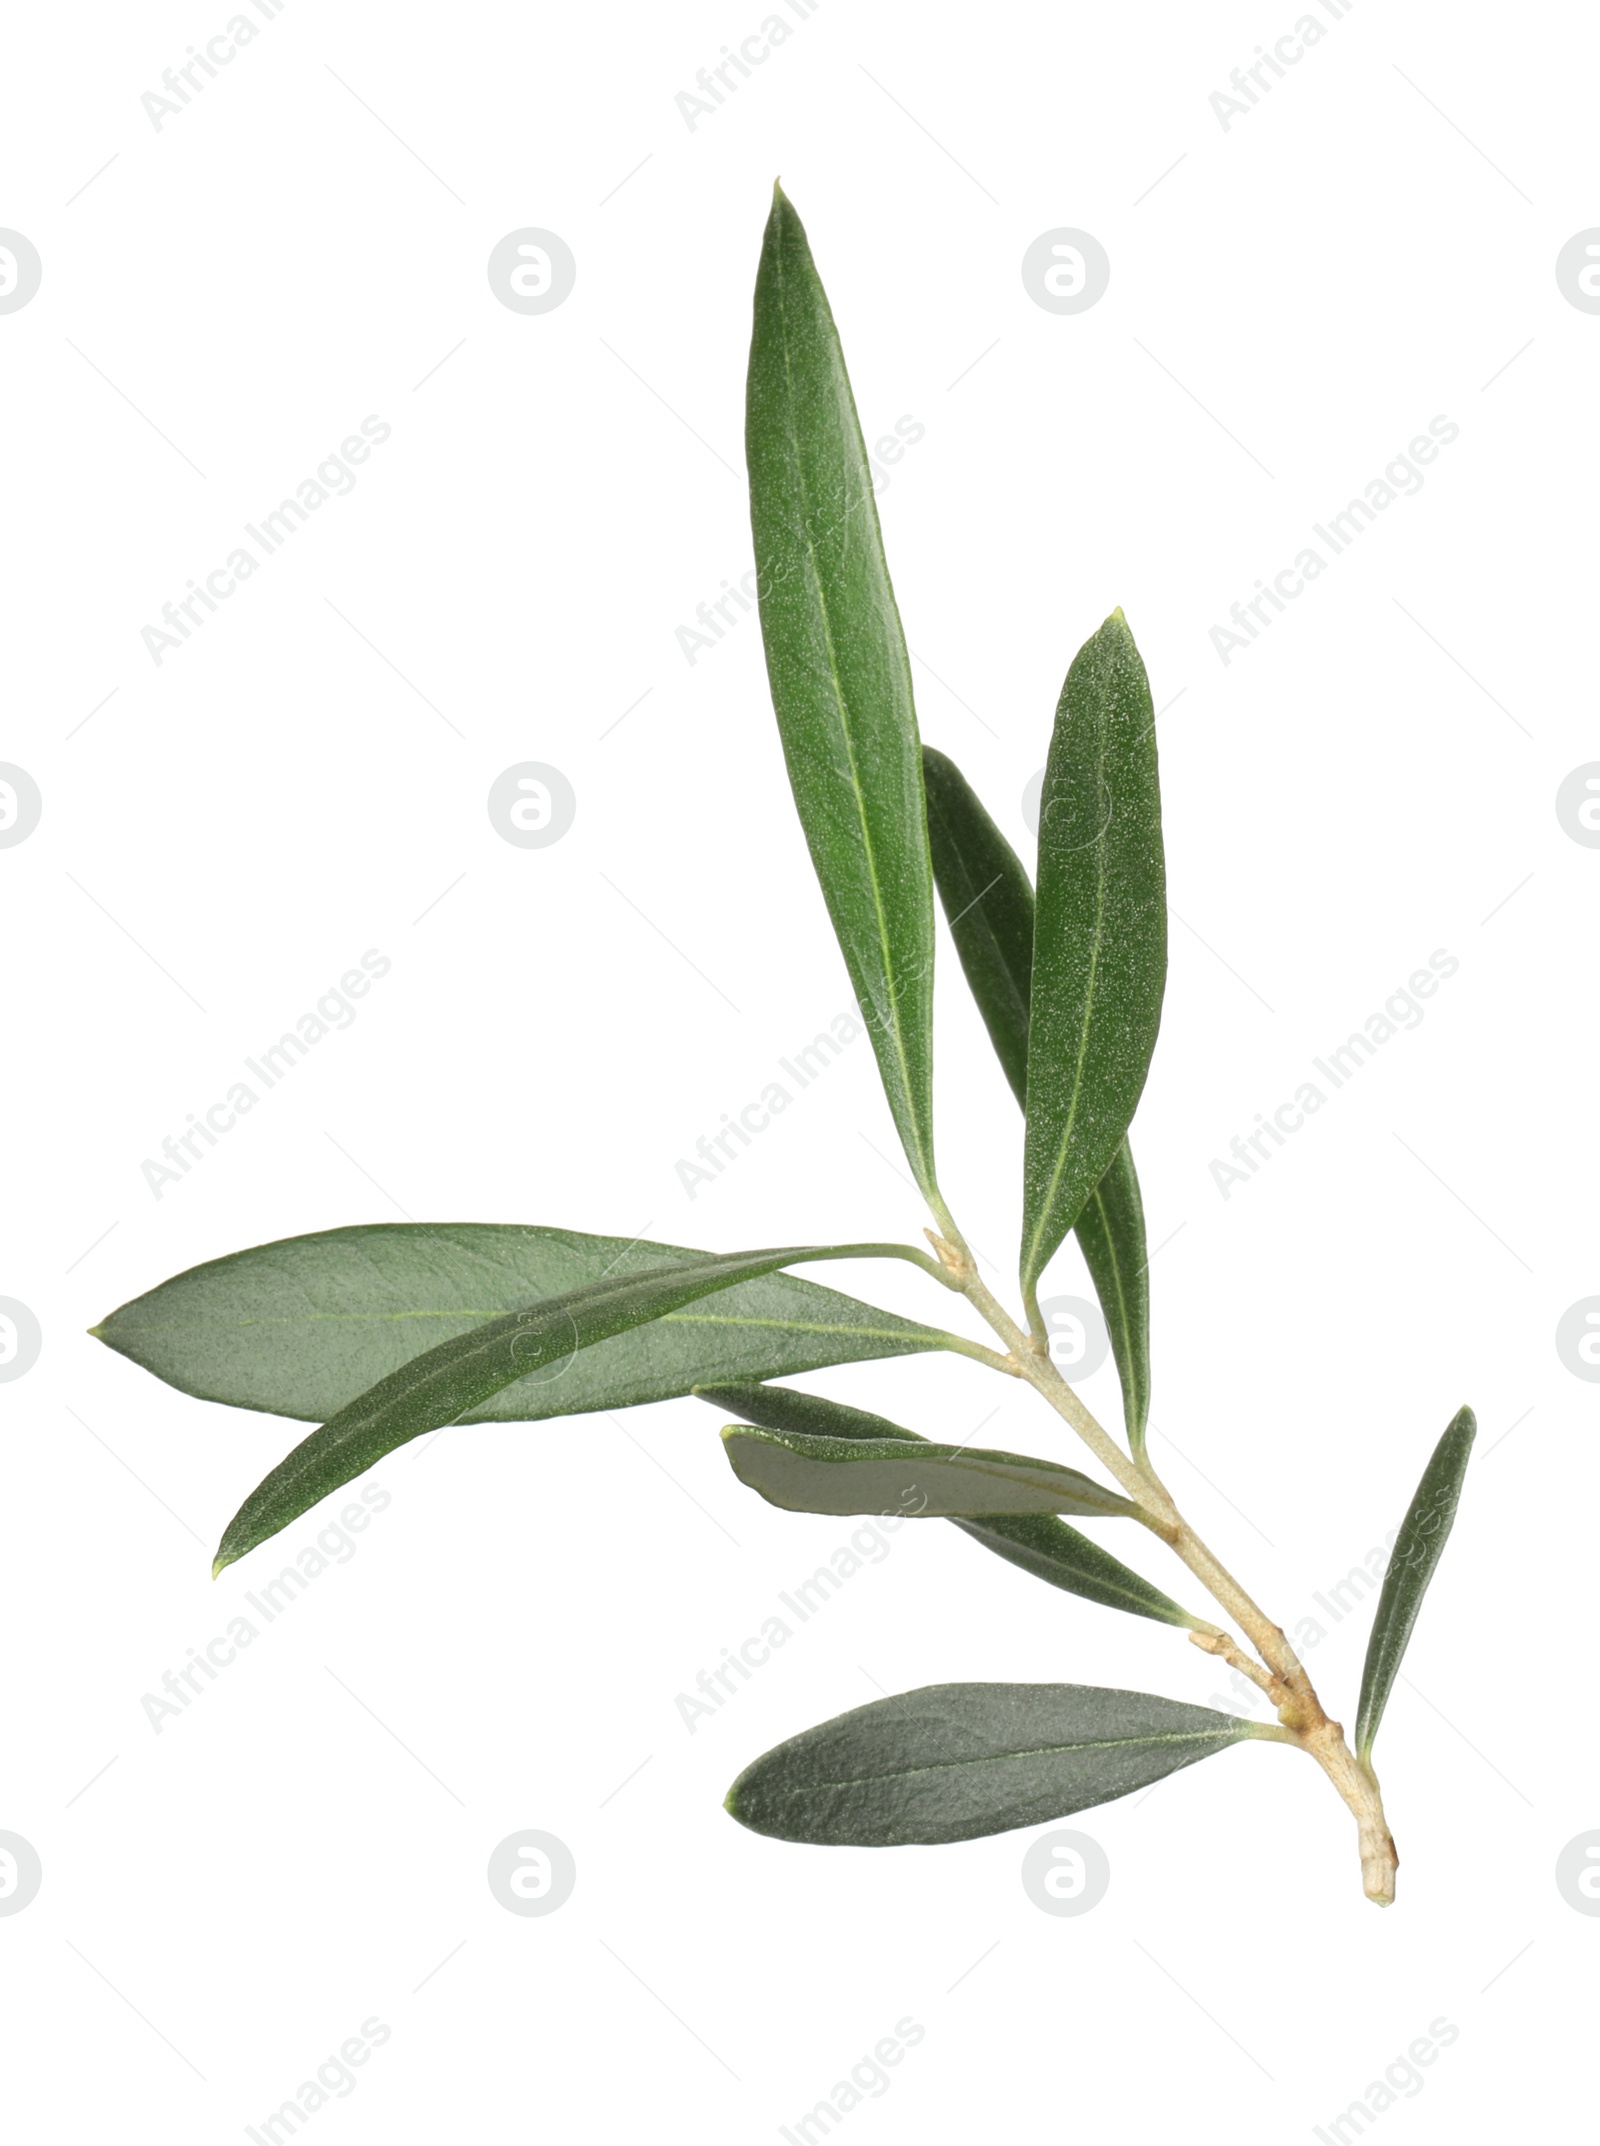 Photo of Olive tree branch with green leaves on white background